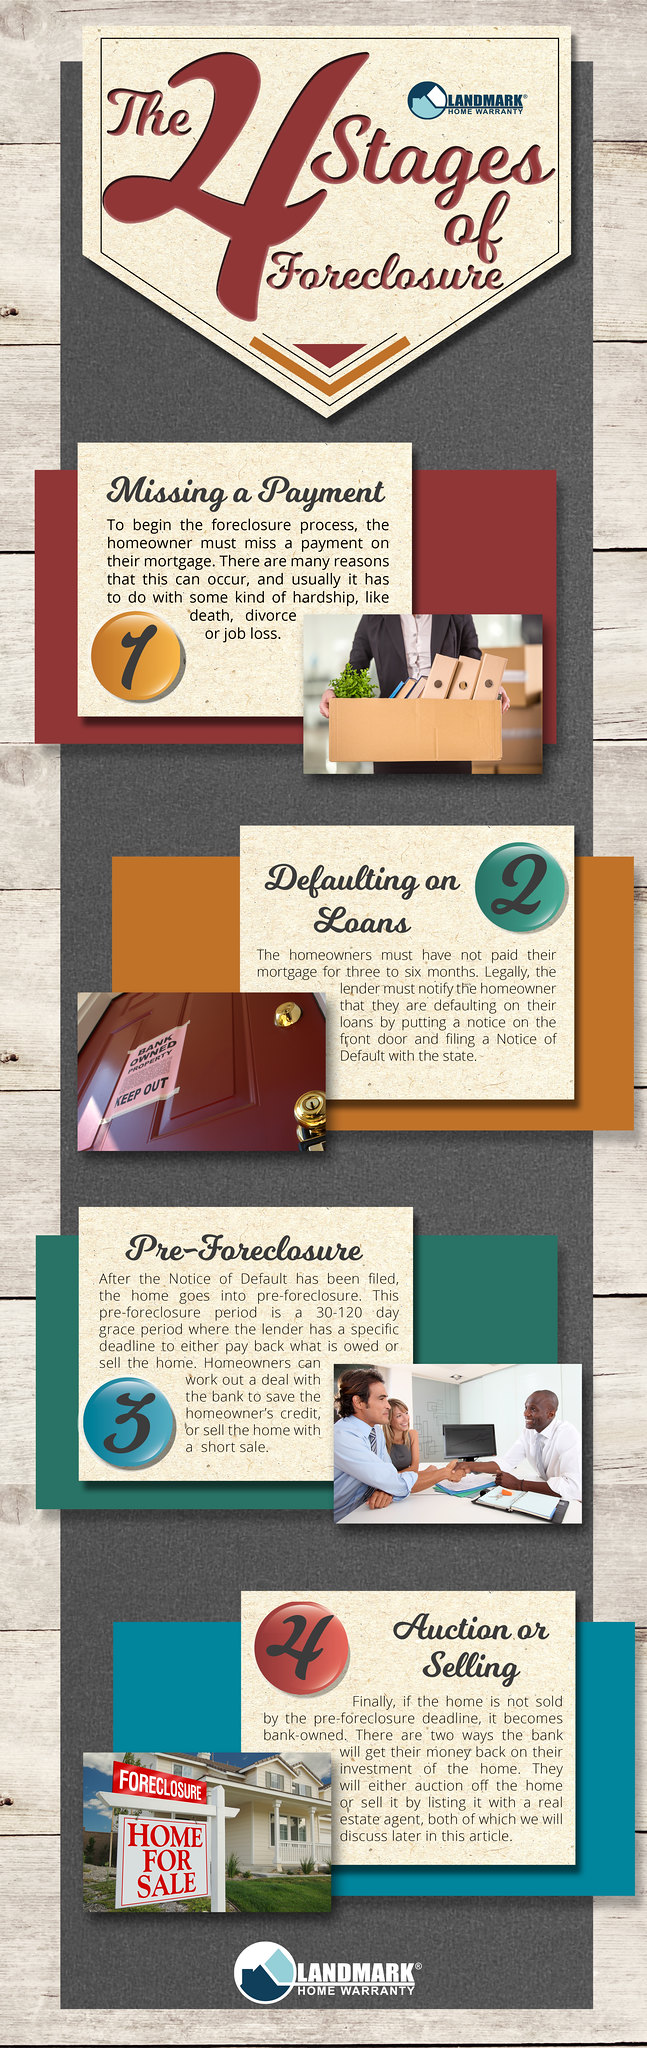 The four stages of a foreclosure